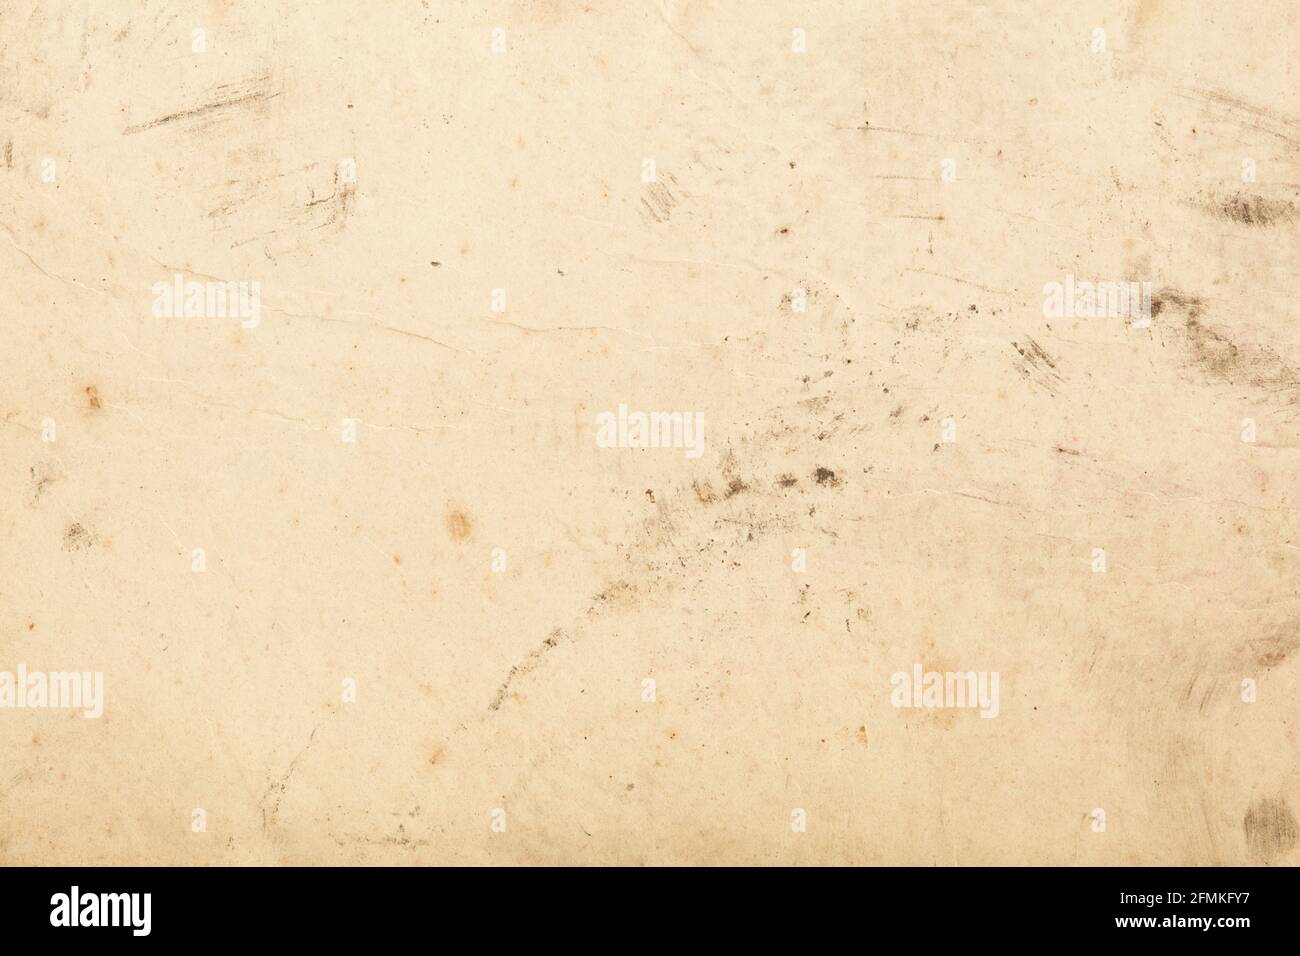 Old paper with black dust signs and scratches texture background Stock Photo